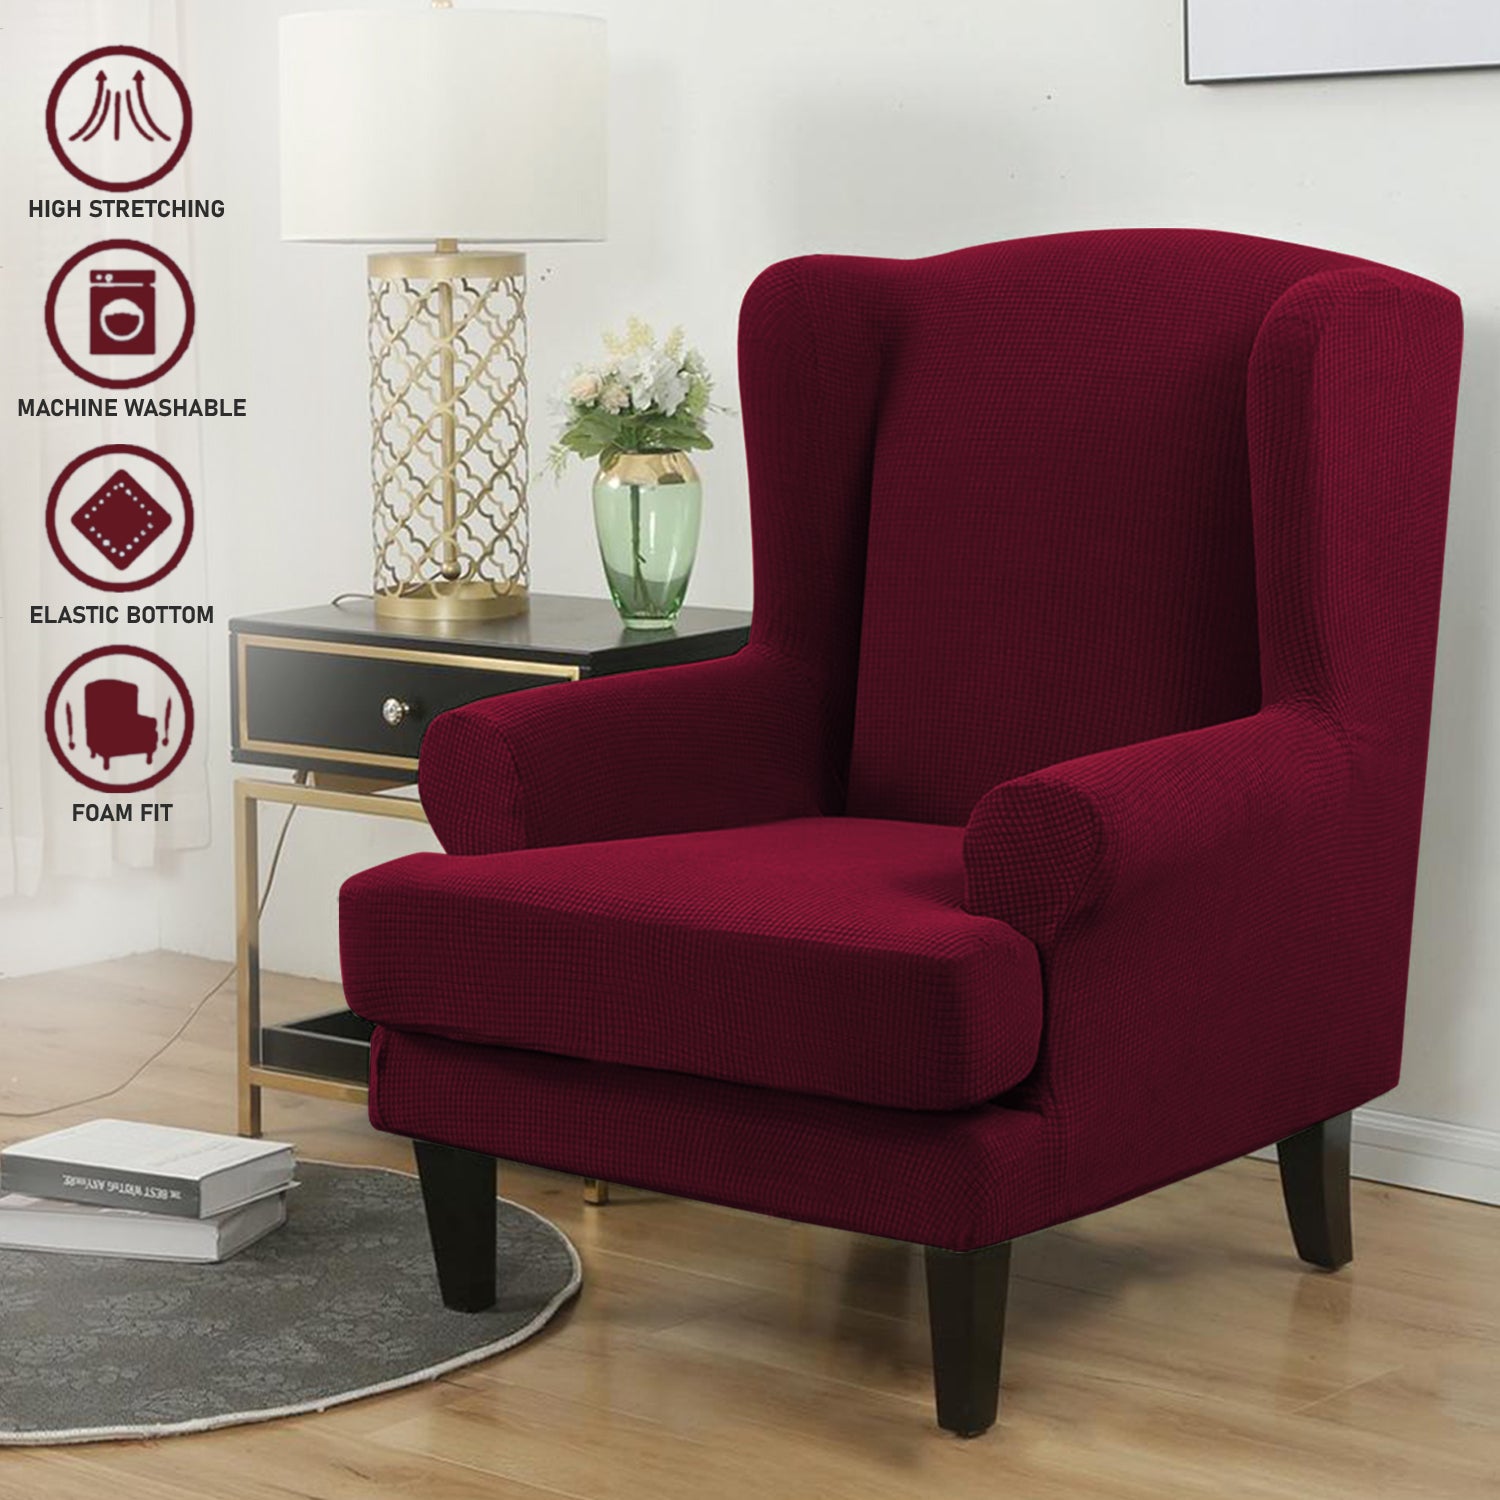 Fully Covered Stretchable Jacquard Wing Chair Cover, Wine